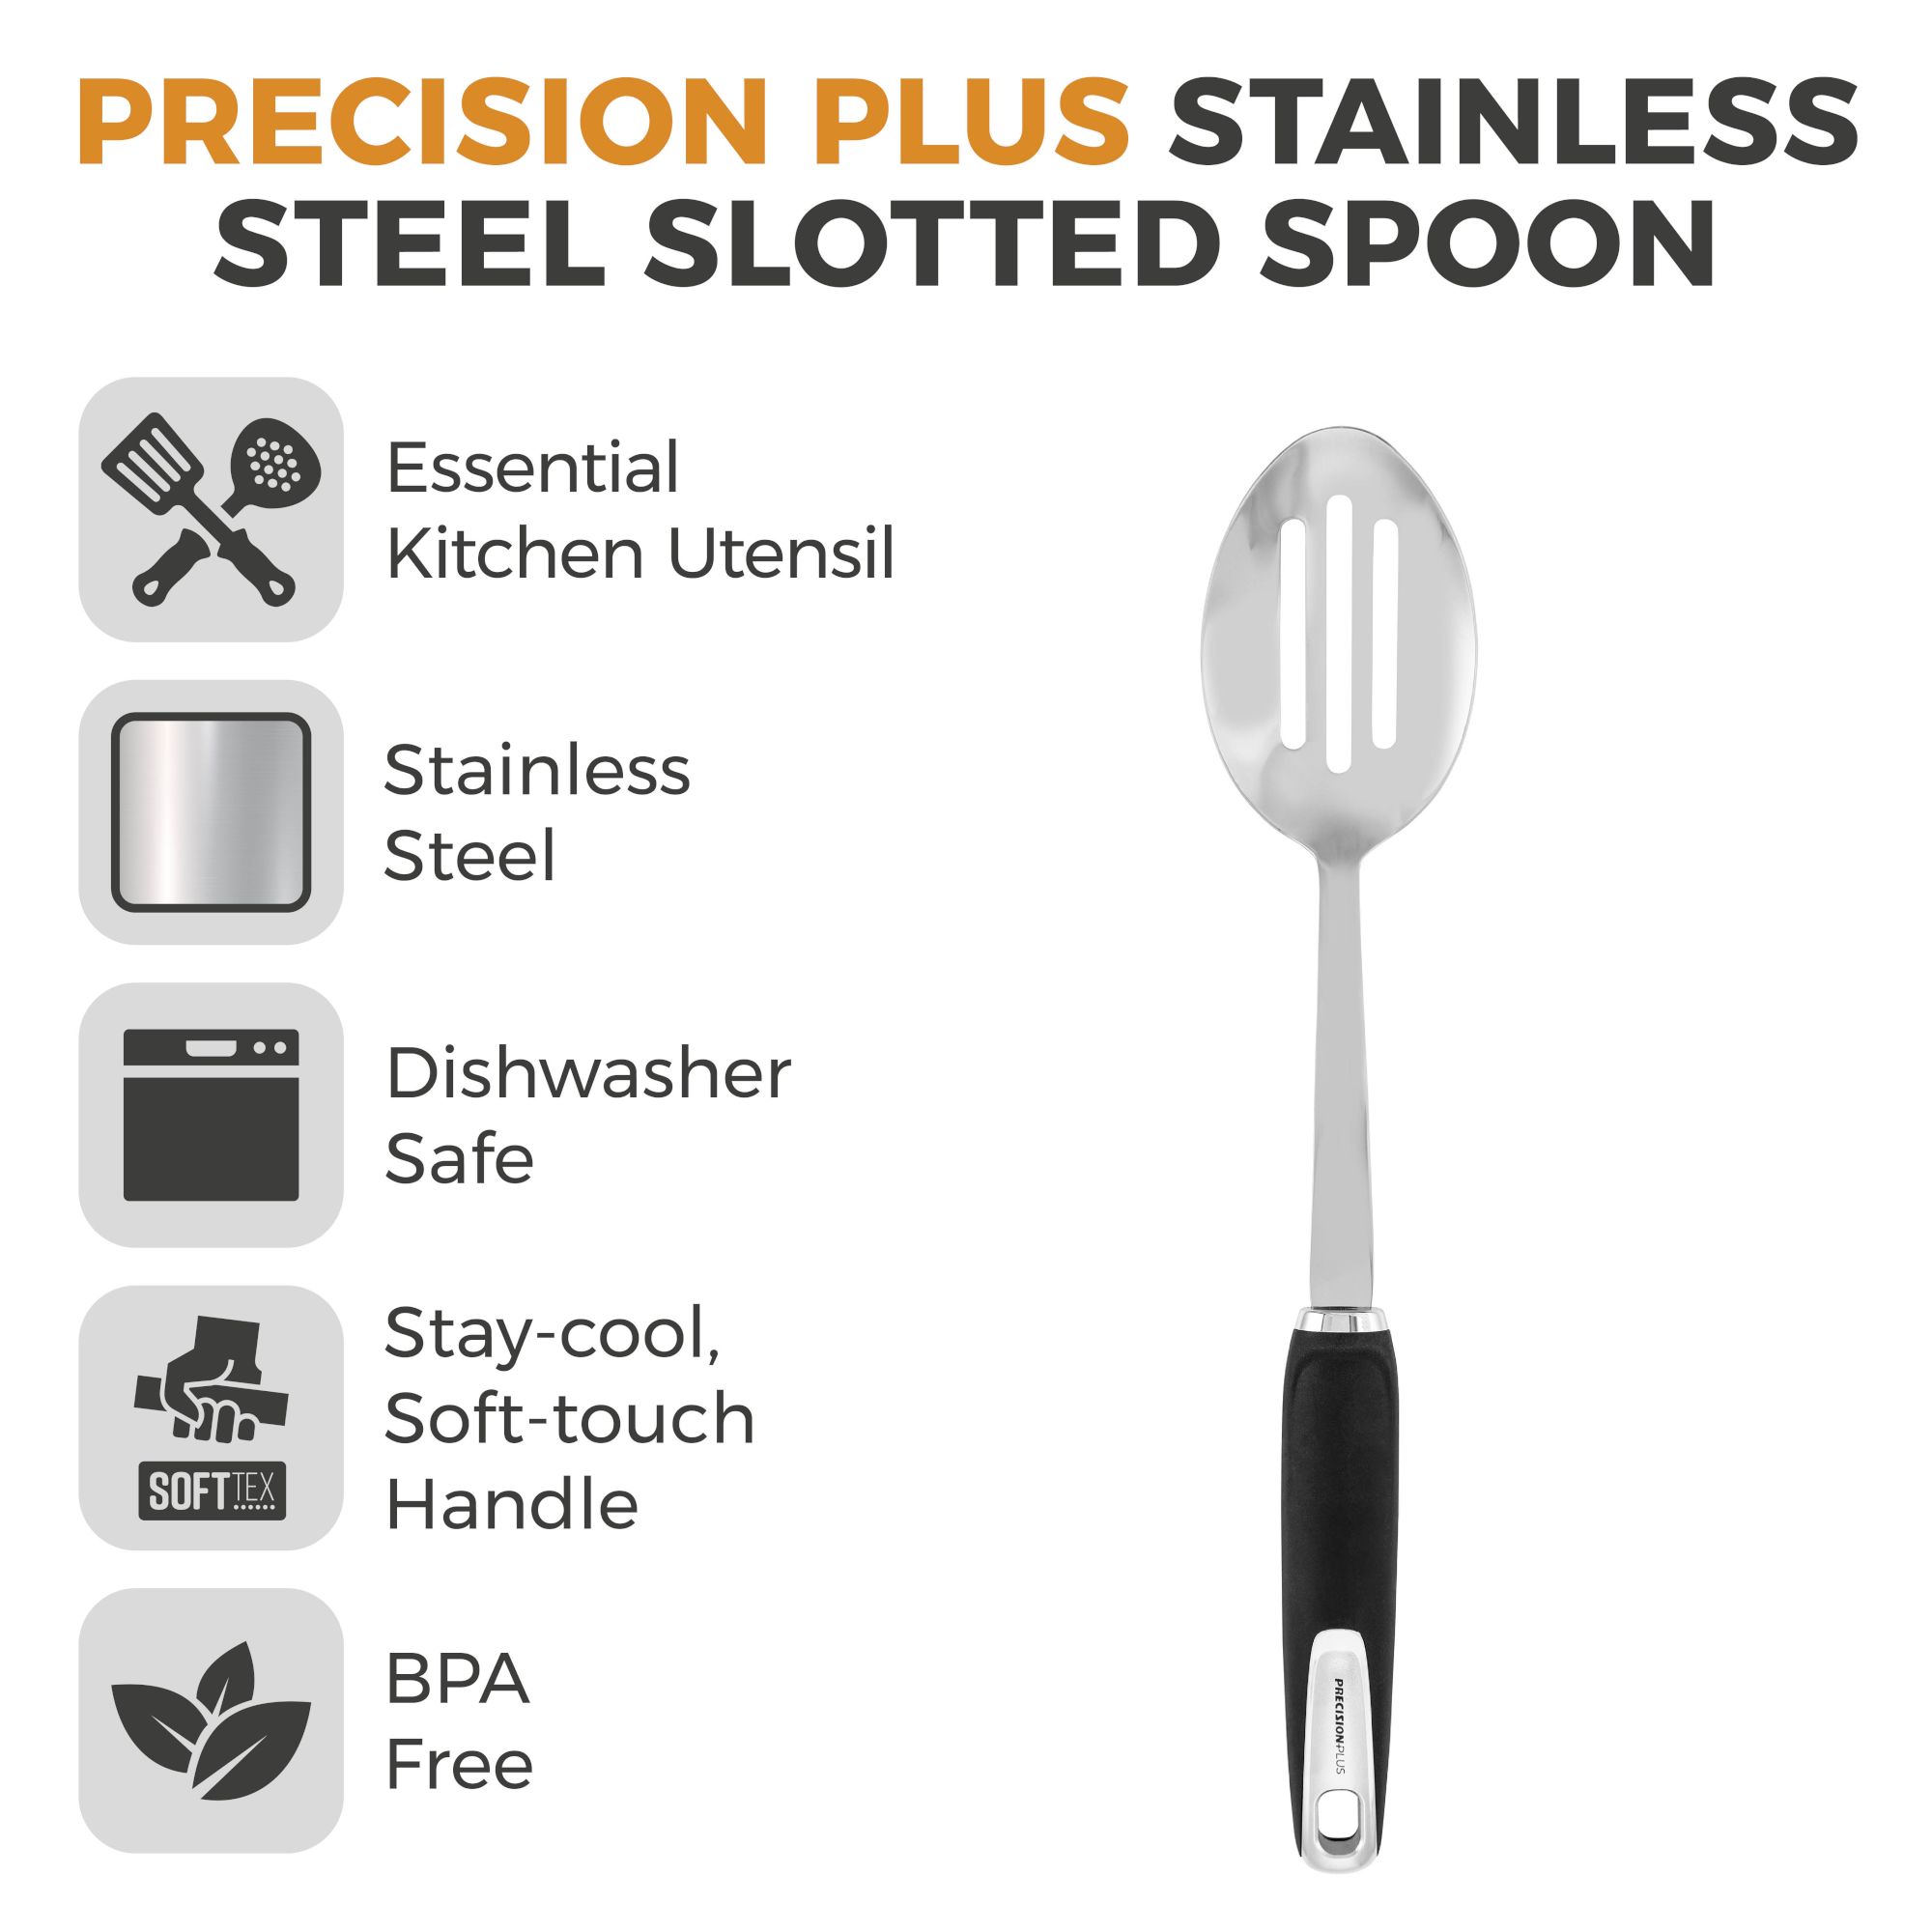 Tower Precision Plus T832189 Stainless Steel Slotted Spoon